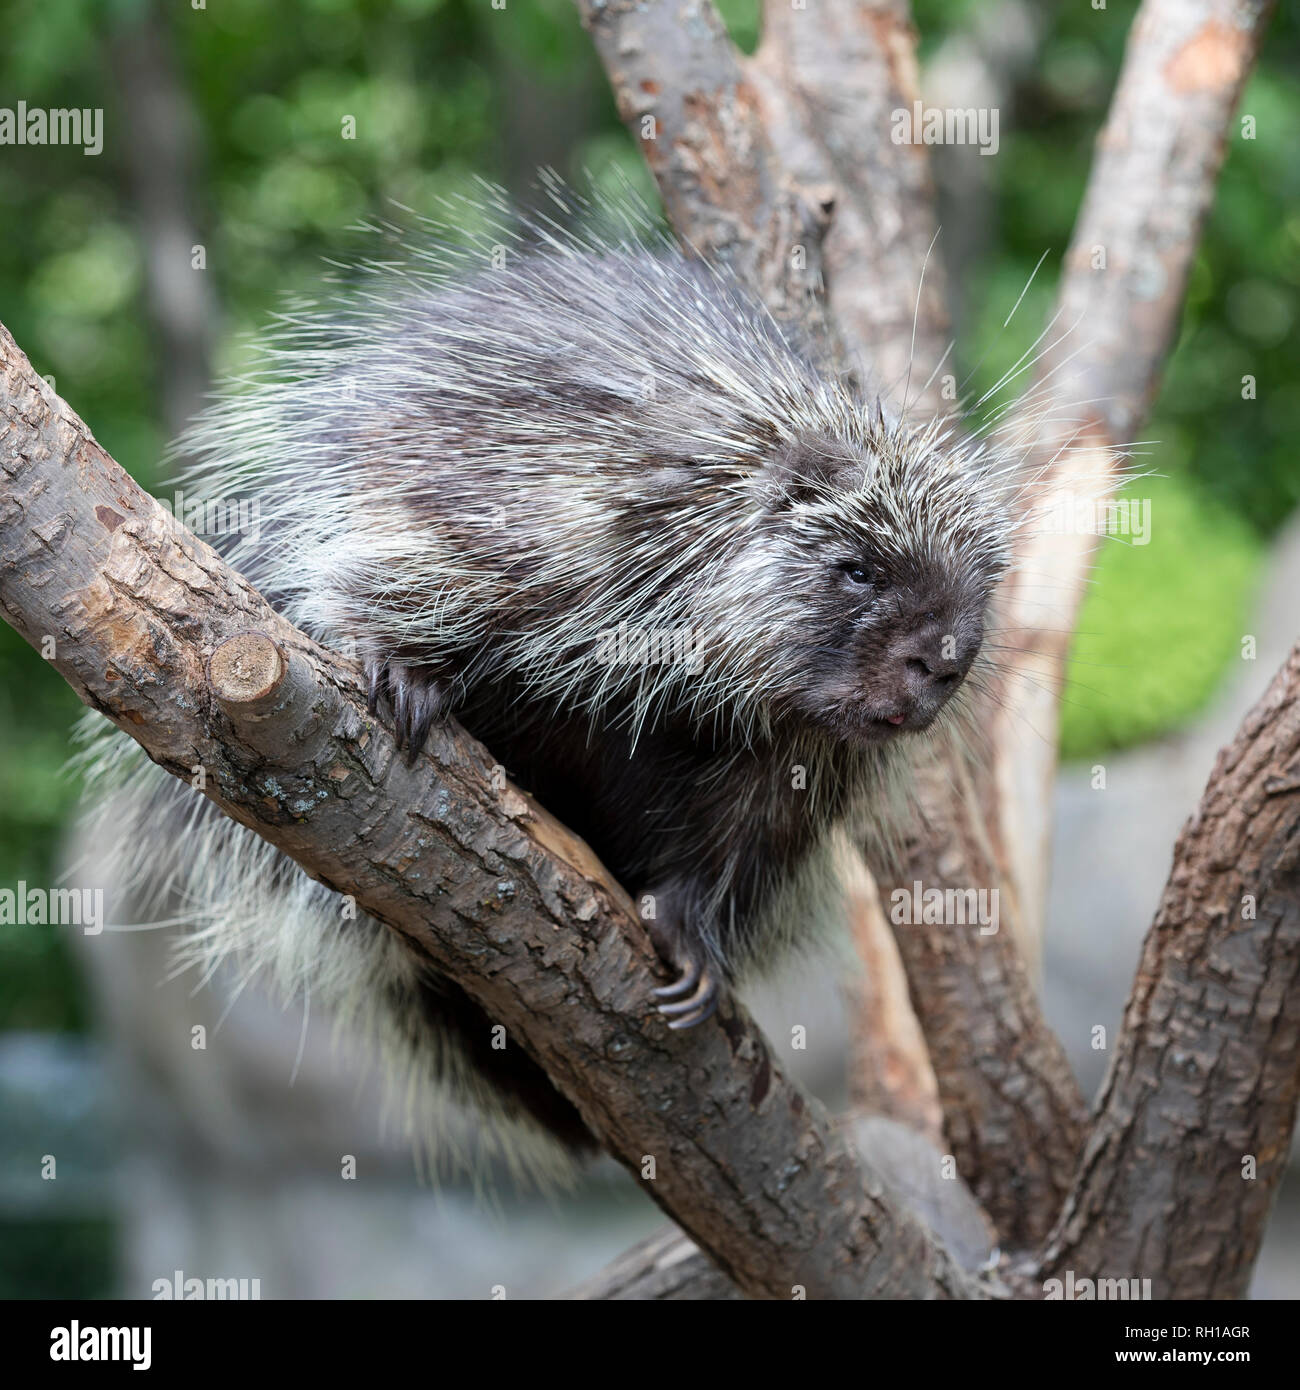 North American Porcupine (Erethizon Dorsatum) climbing a tree, also known as the Canadian Porcupine Stock Photo